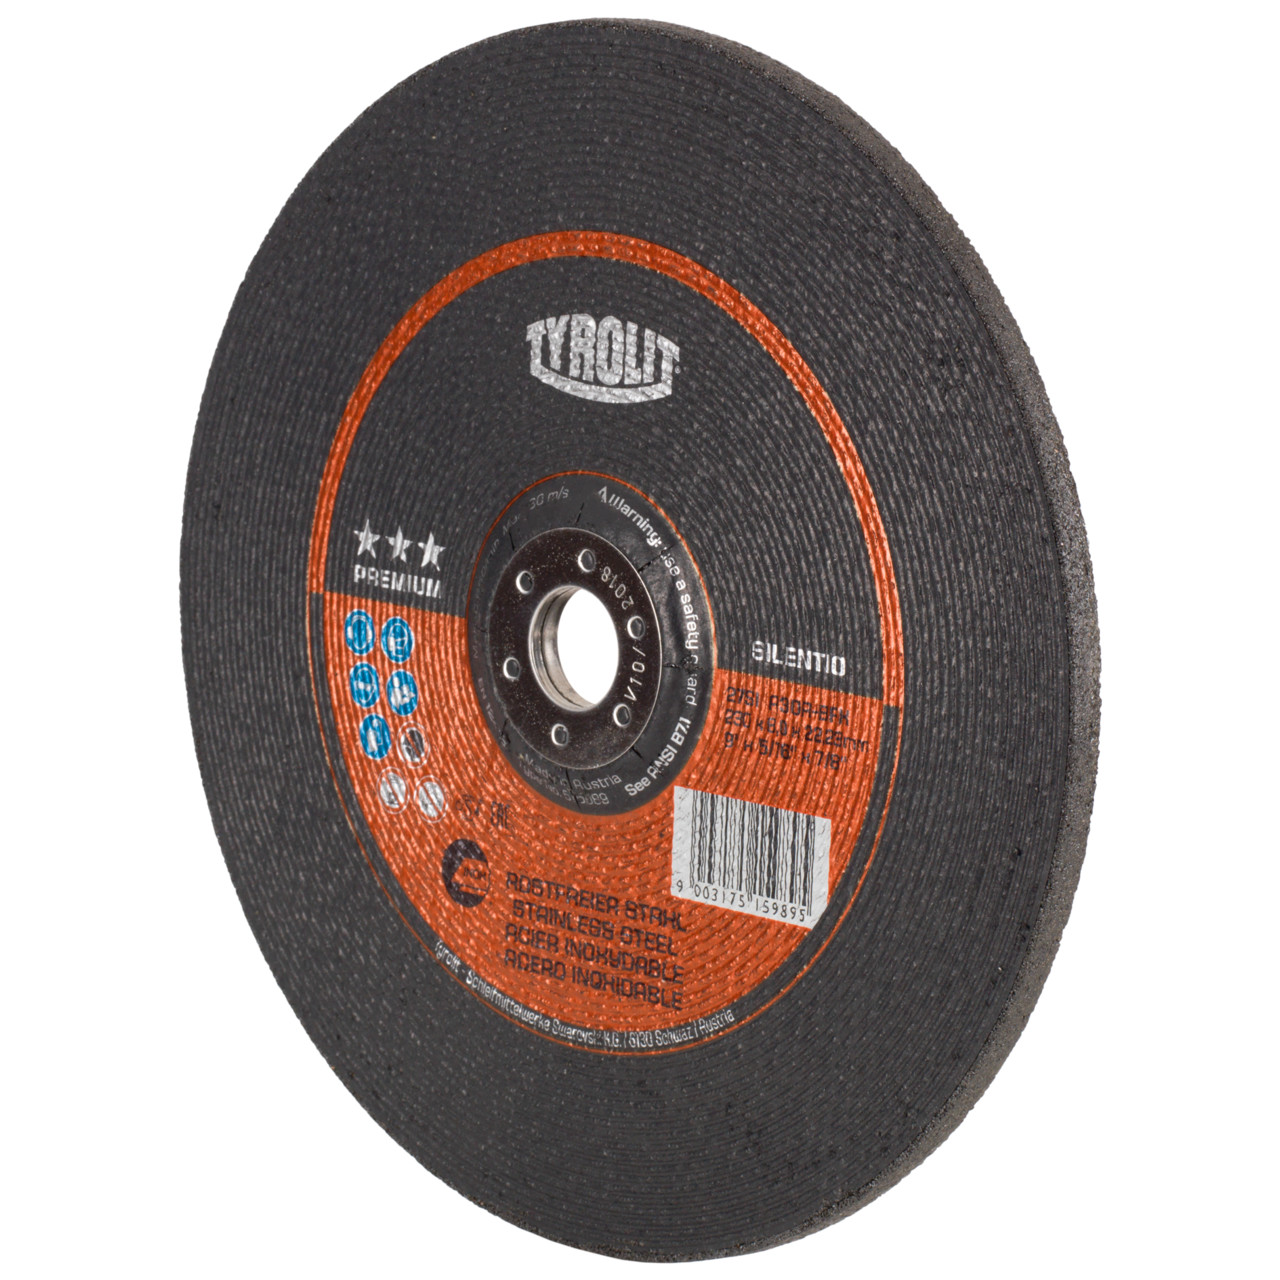 TYROLIT grinding wheel DxUxH 178x7x22.23 Silentio for stainless steel, shape: 27 - offset version, Art. 515988